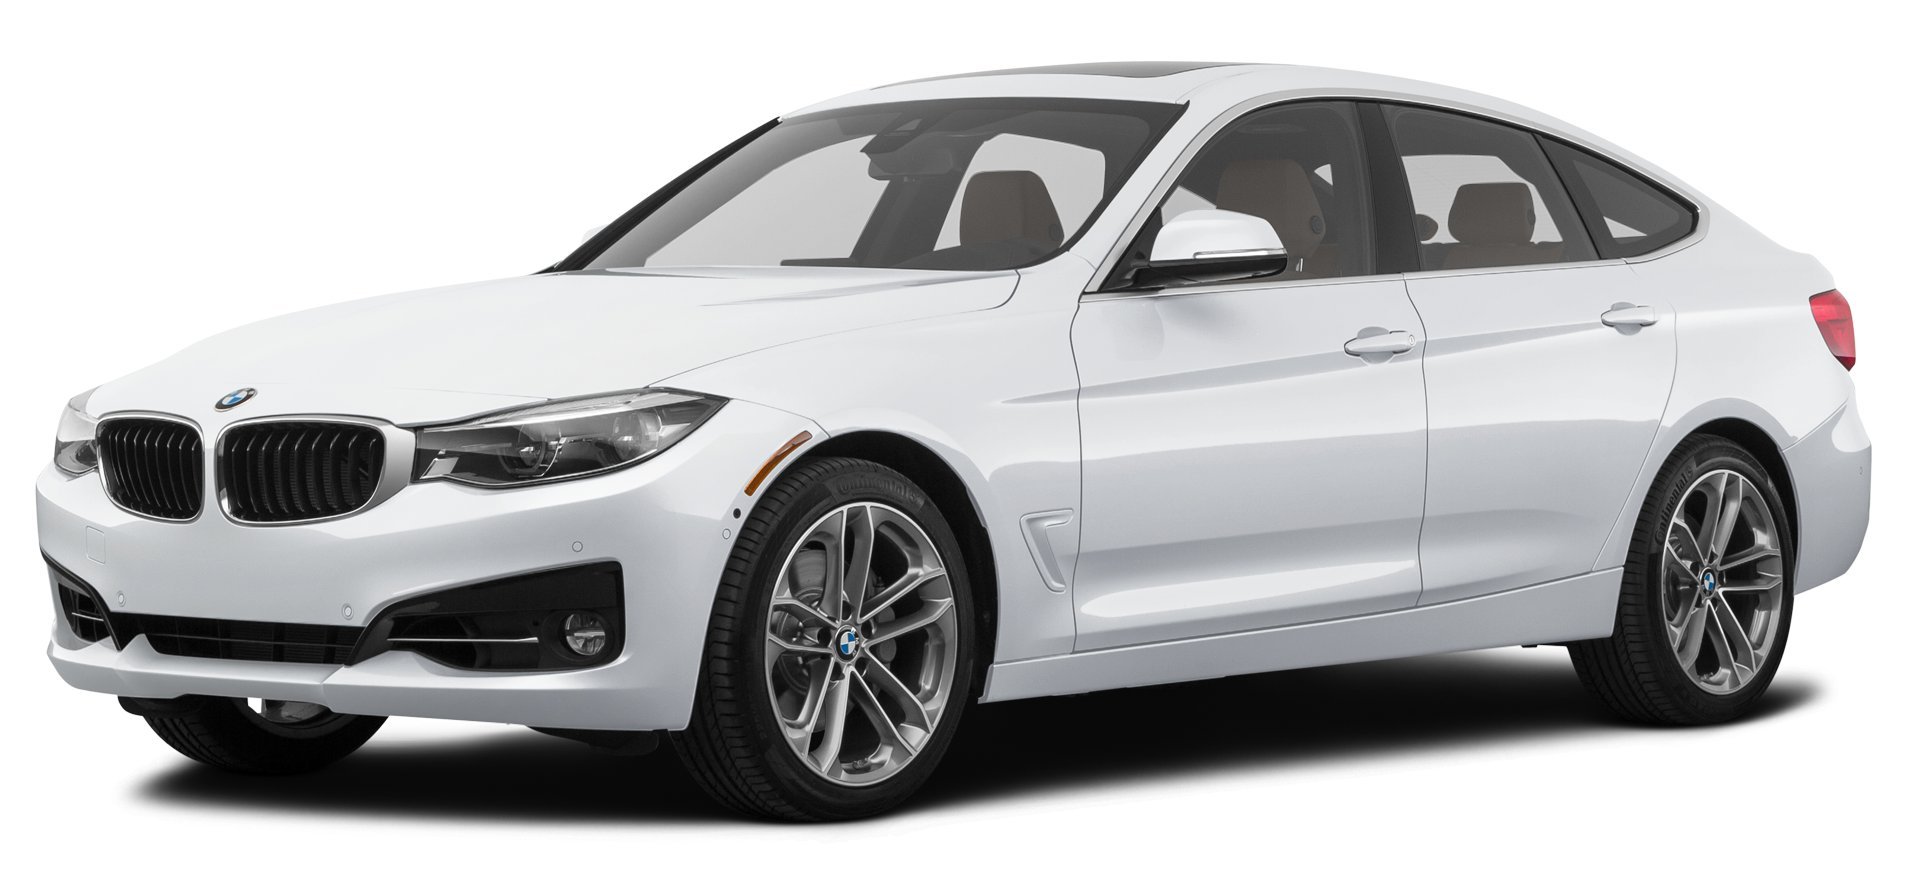  BMW 340I oem parts and accessories on sale